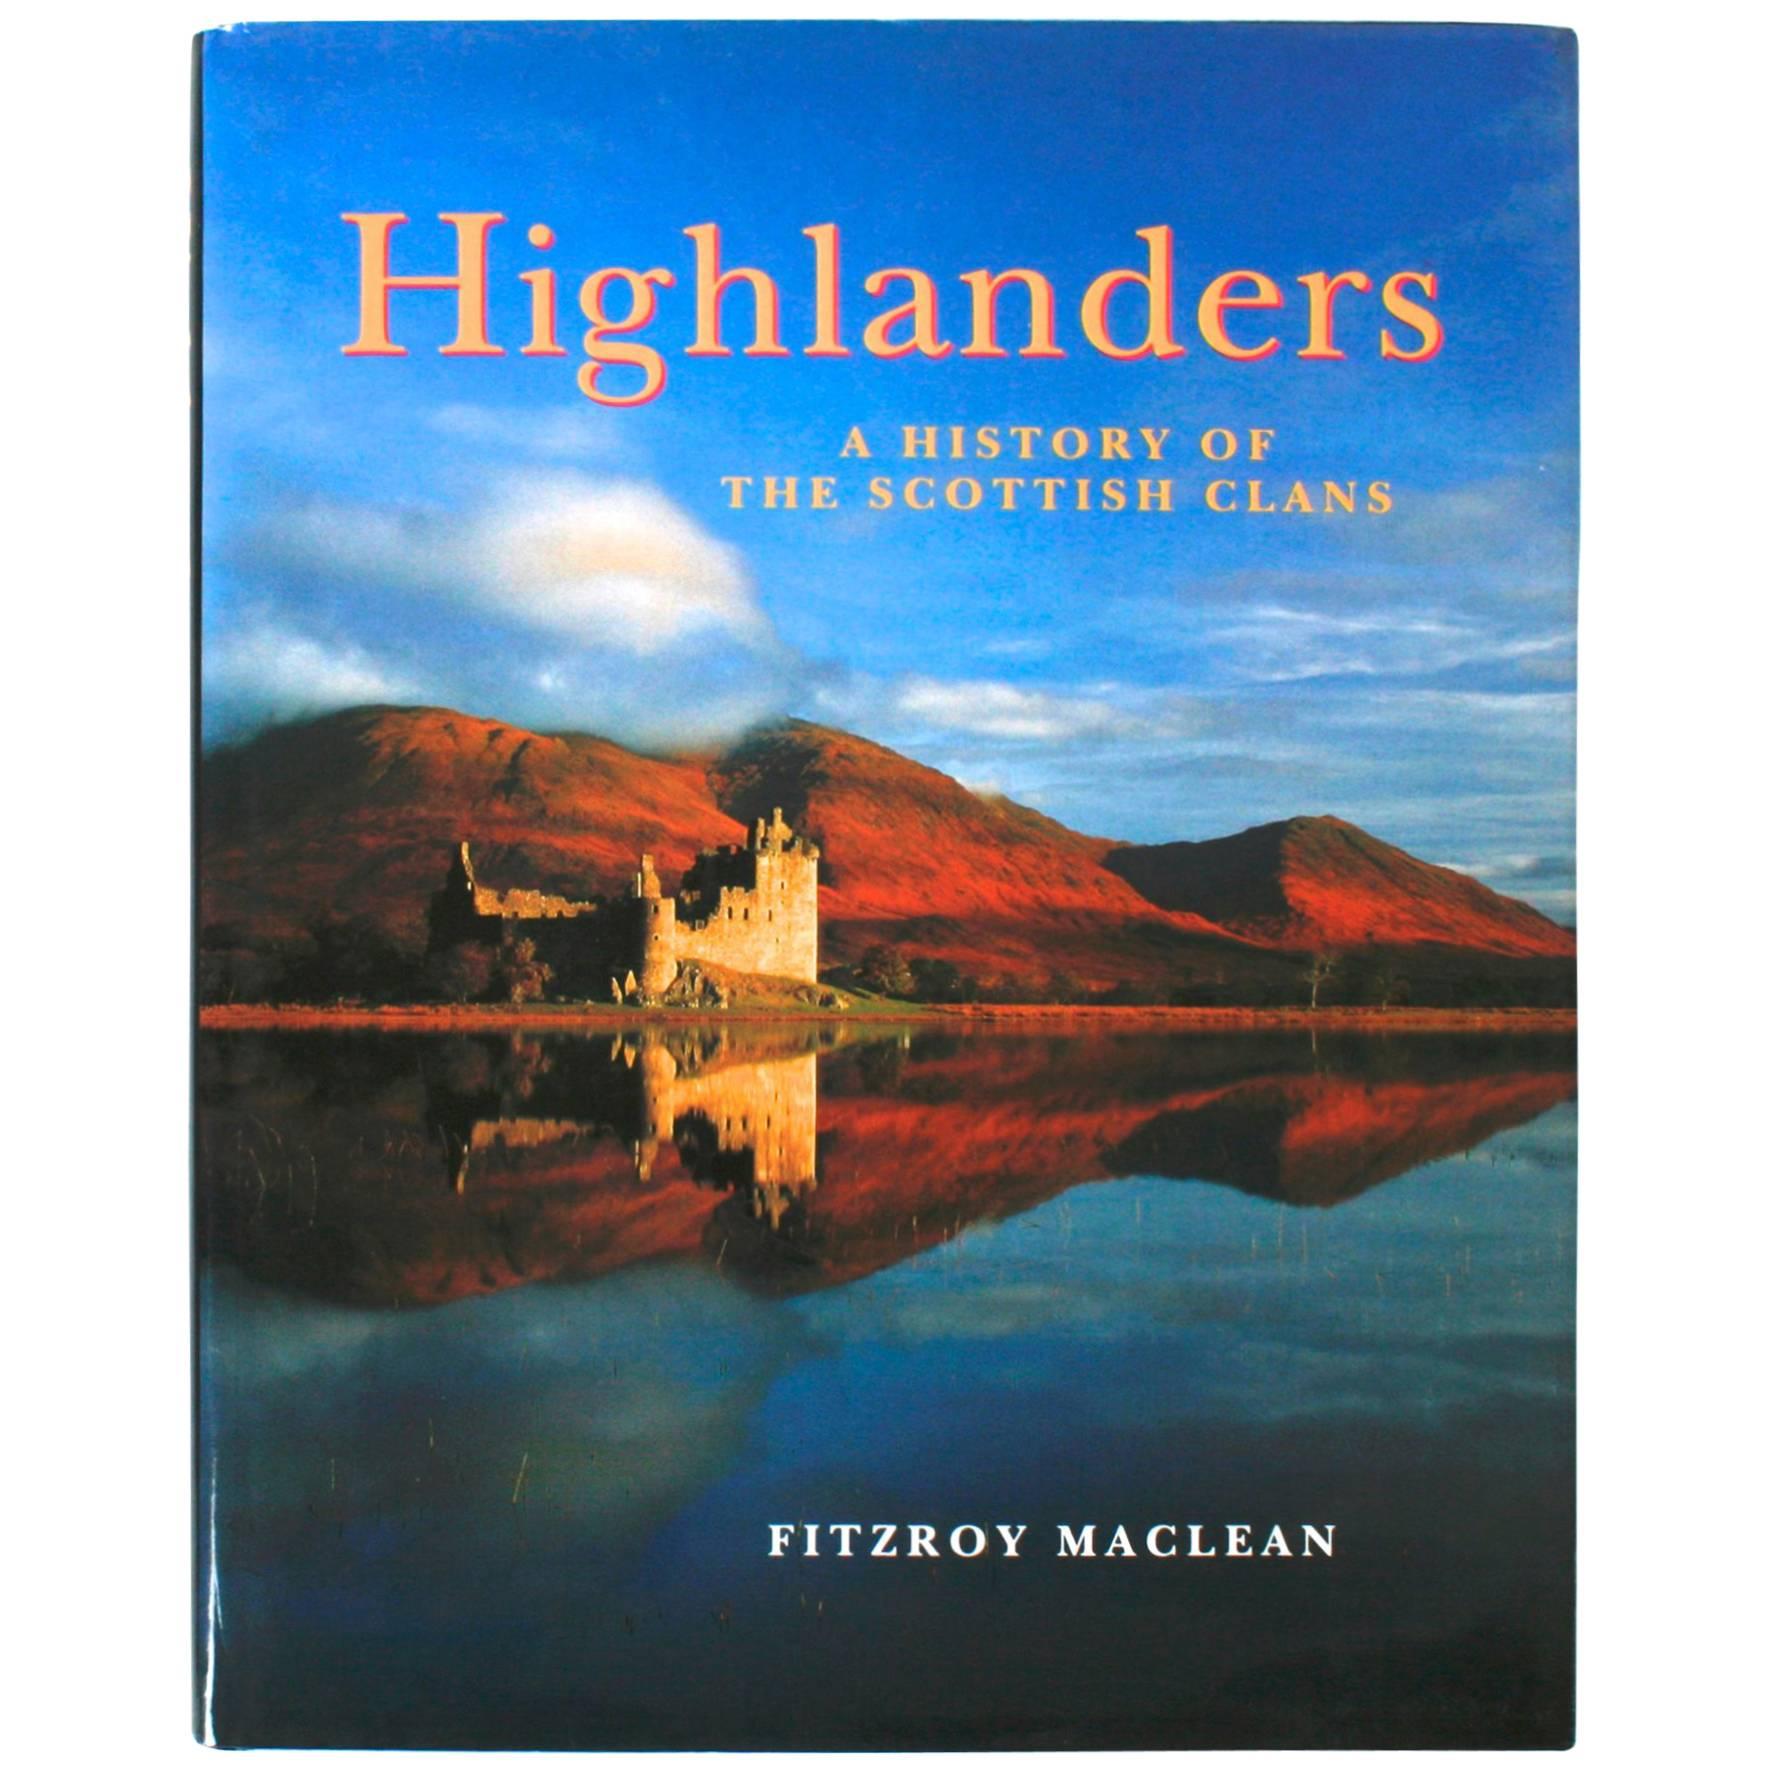 Highlanders, A History of the Scottish Clans, First Edition